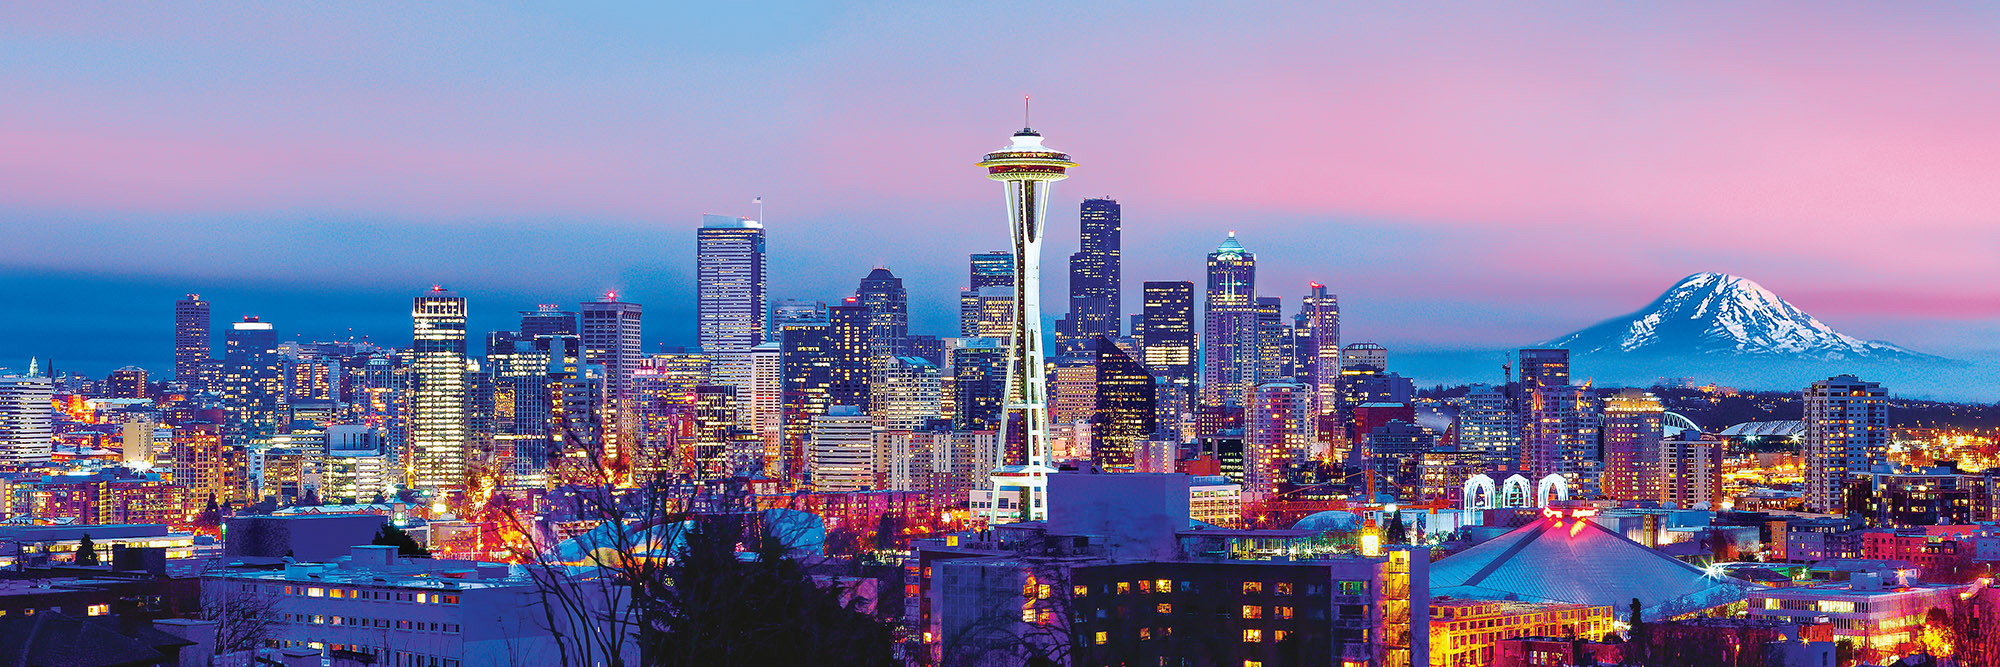 Seattle DUPE Travel Jigsaw Puzzle